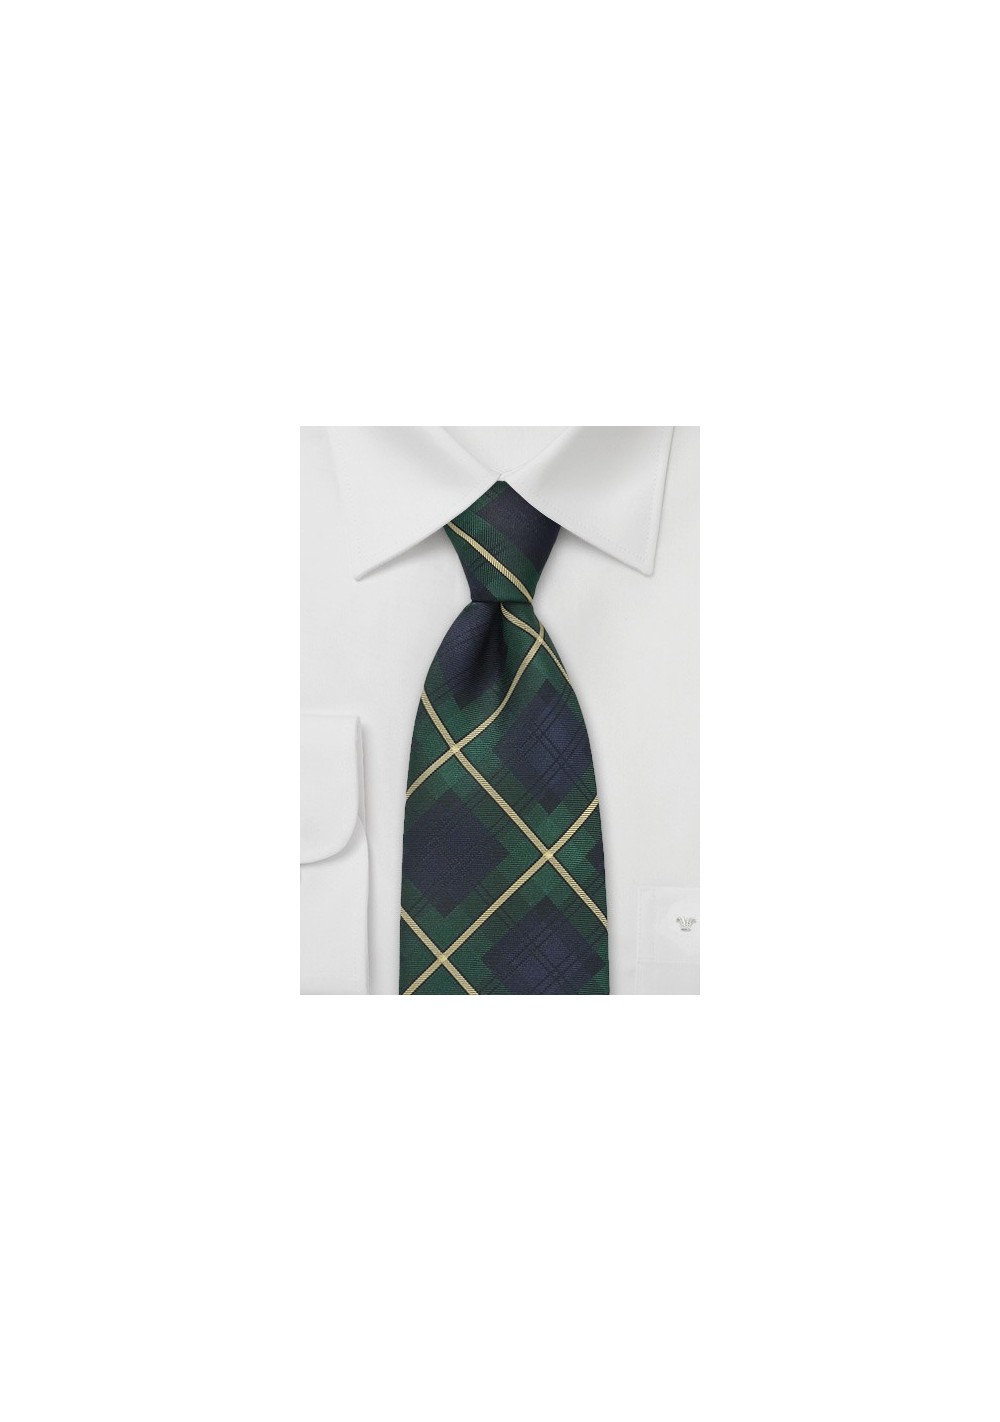 Tartan Plaid Tie in Navy and Green